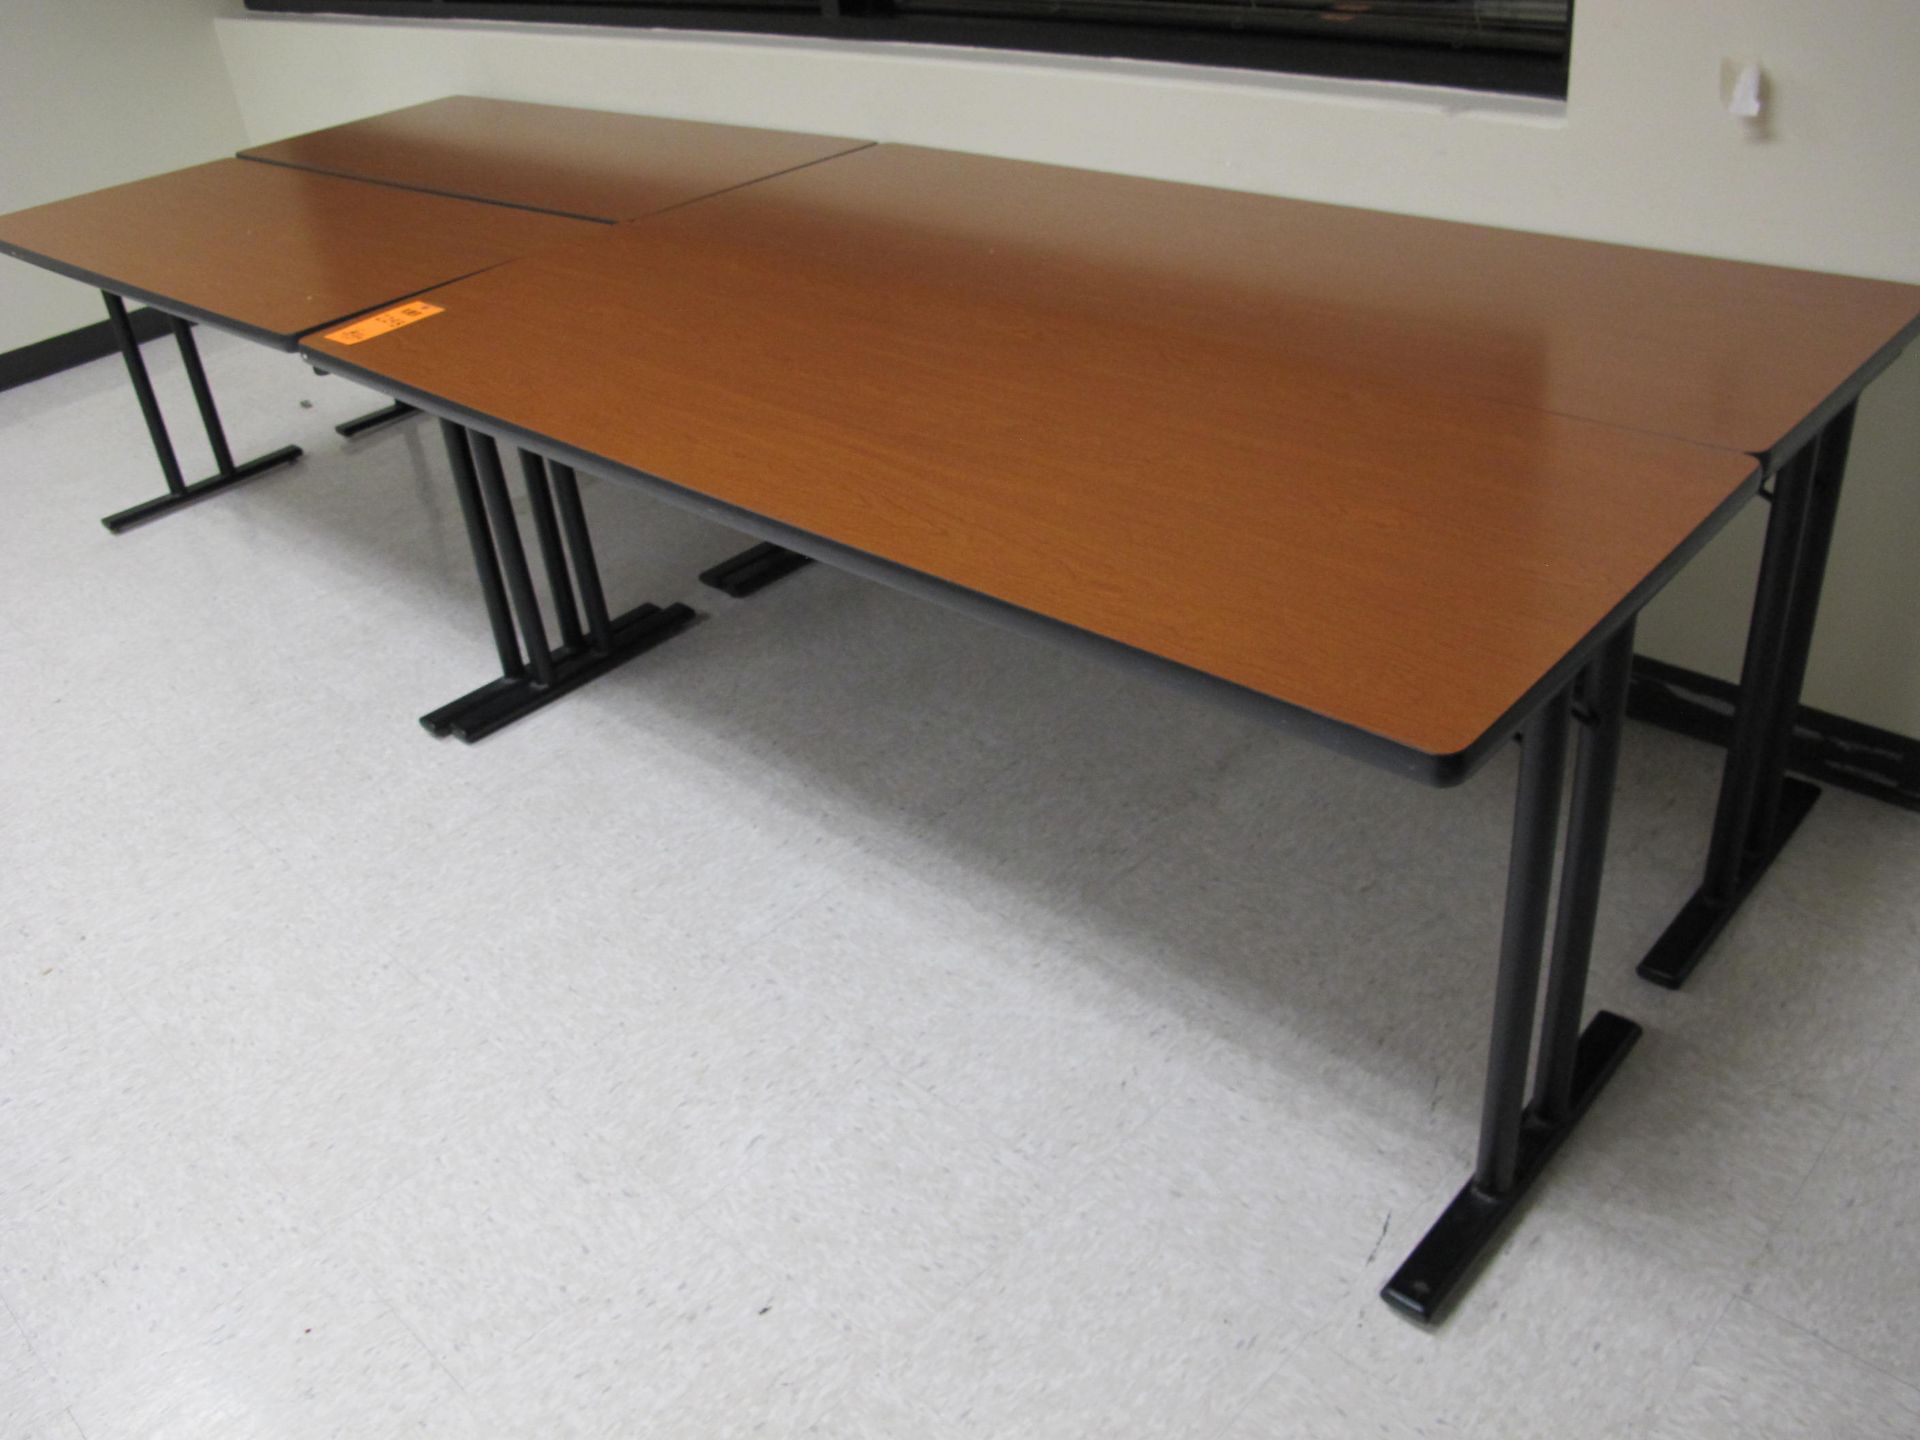 (4) Asst'd Student Work Tables - Image 2 of 2